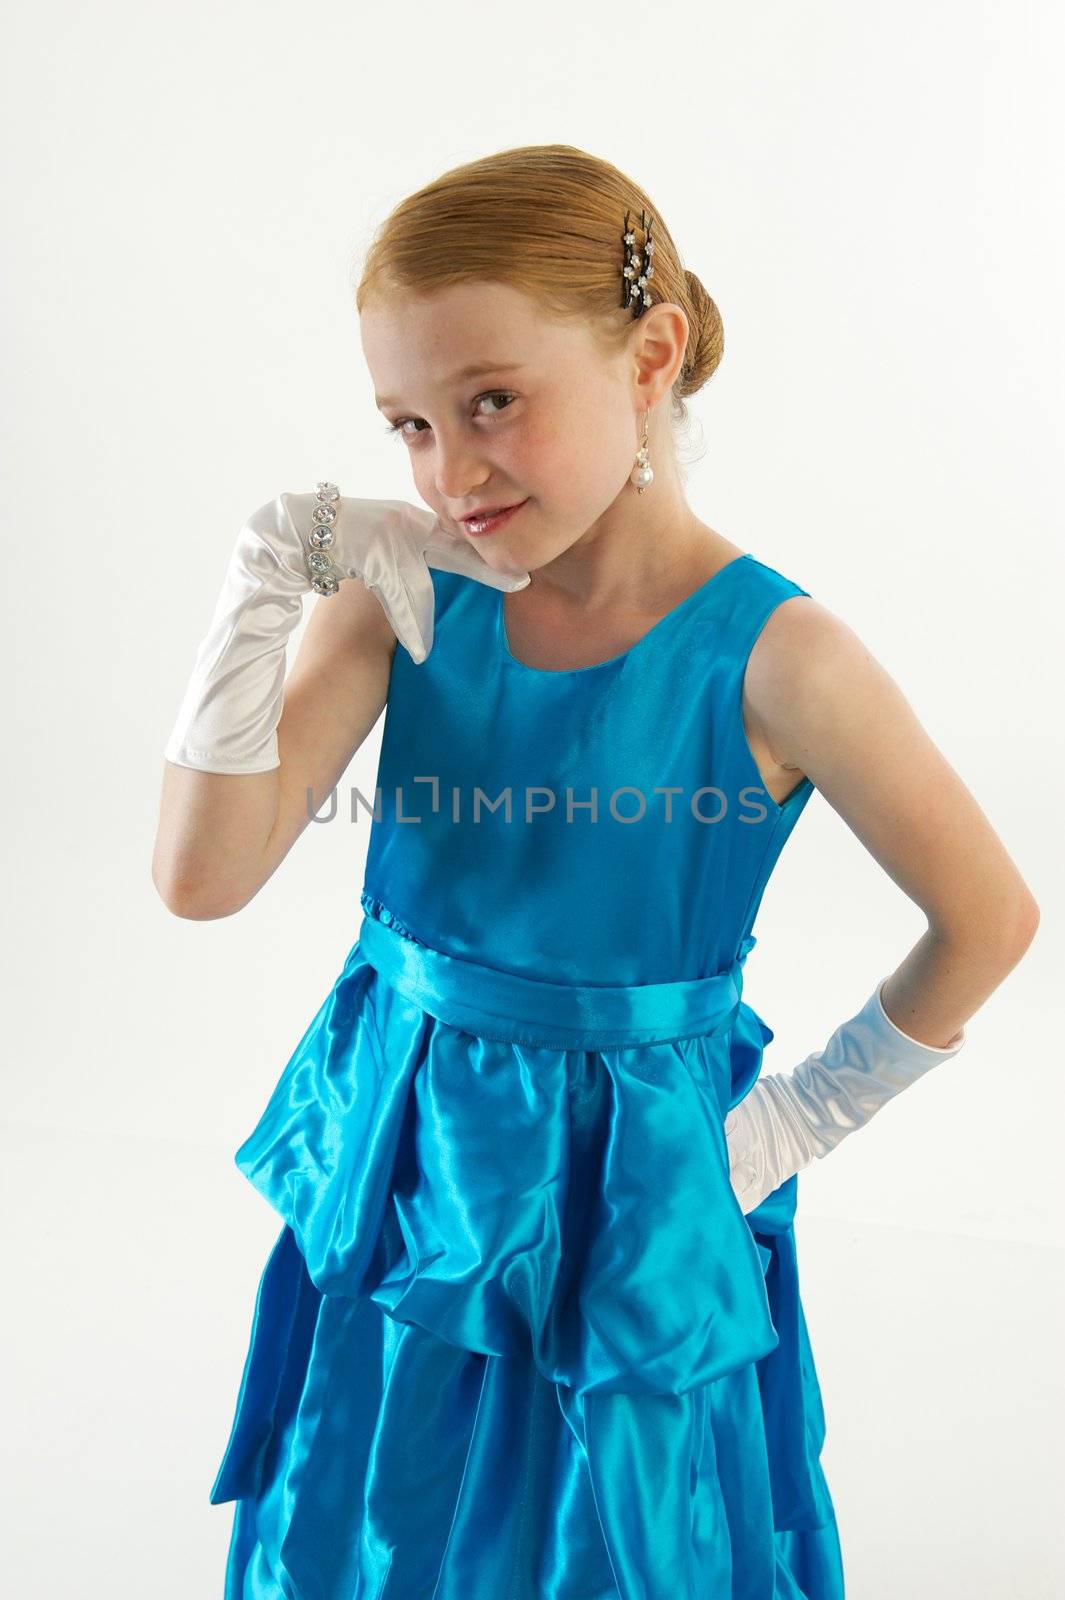 A young redheaded little girl in a blue ball gown with white gloves and jewelry